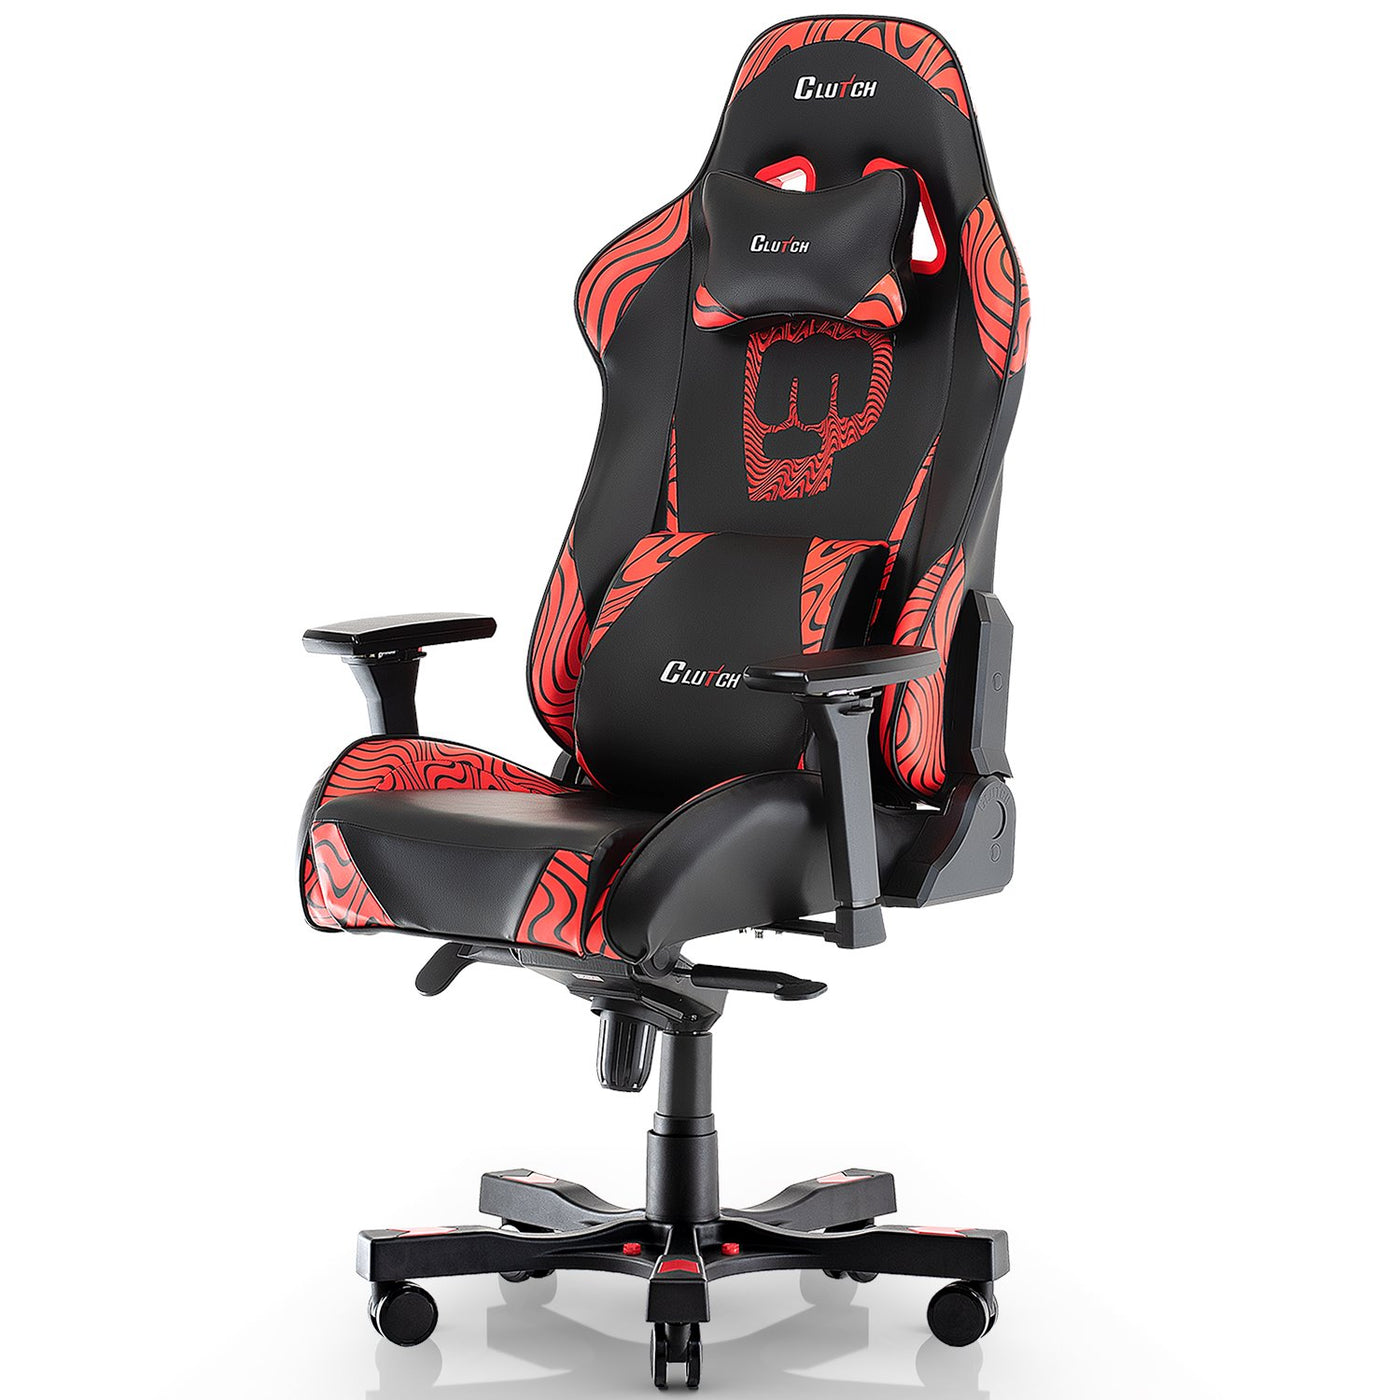 Pewdiepie Edition - Throttle Series Gaming Chair Clutch Chairz Large-XL Red 